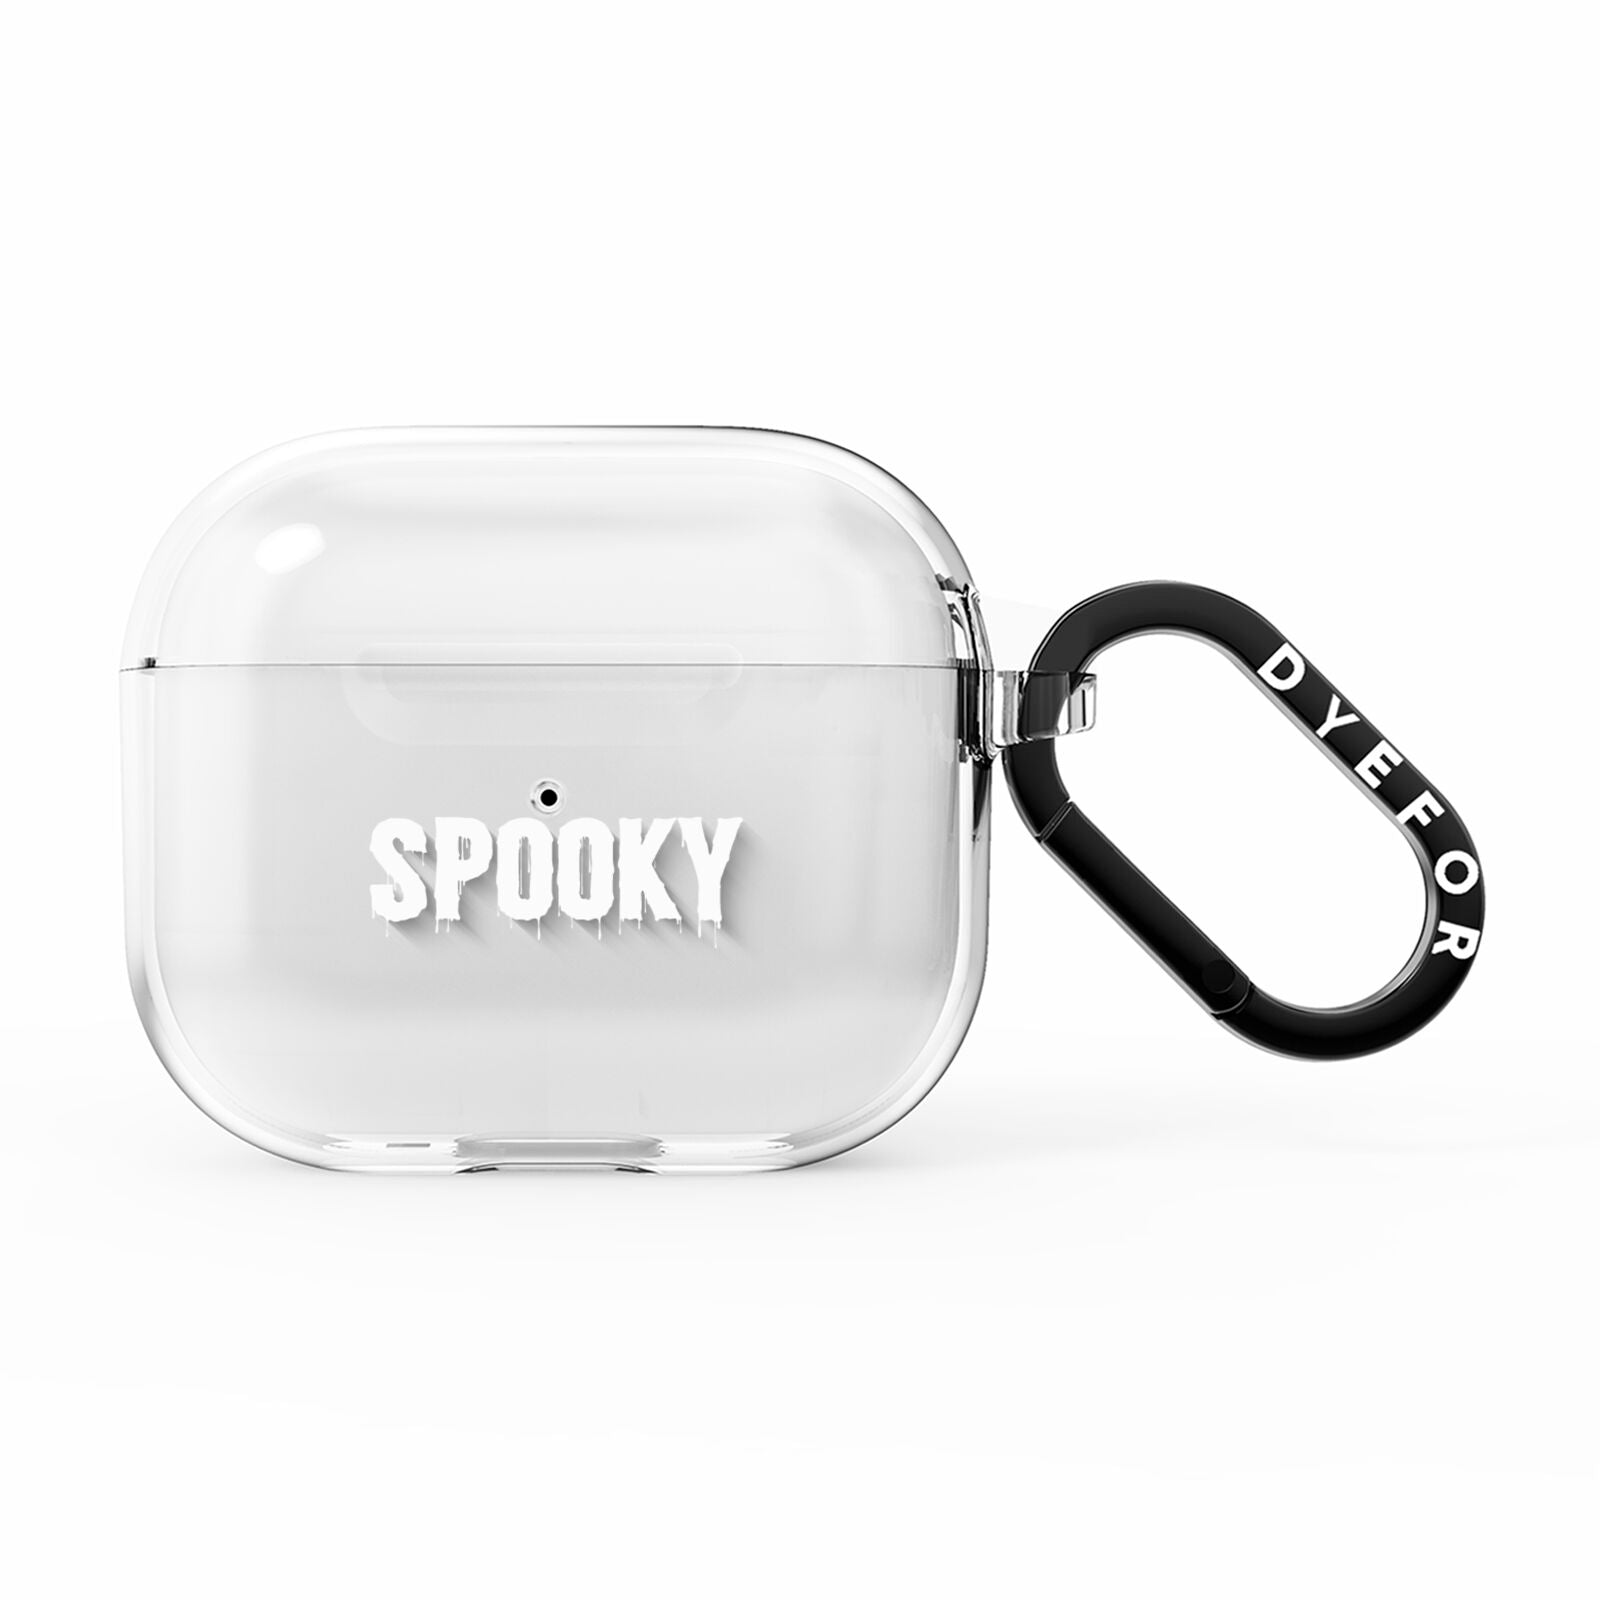 White Dripping Spooky Text AirPods Clear Case 3rd Gen